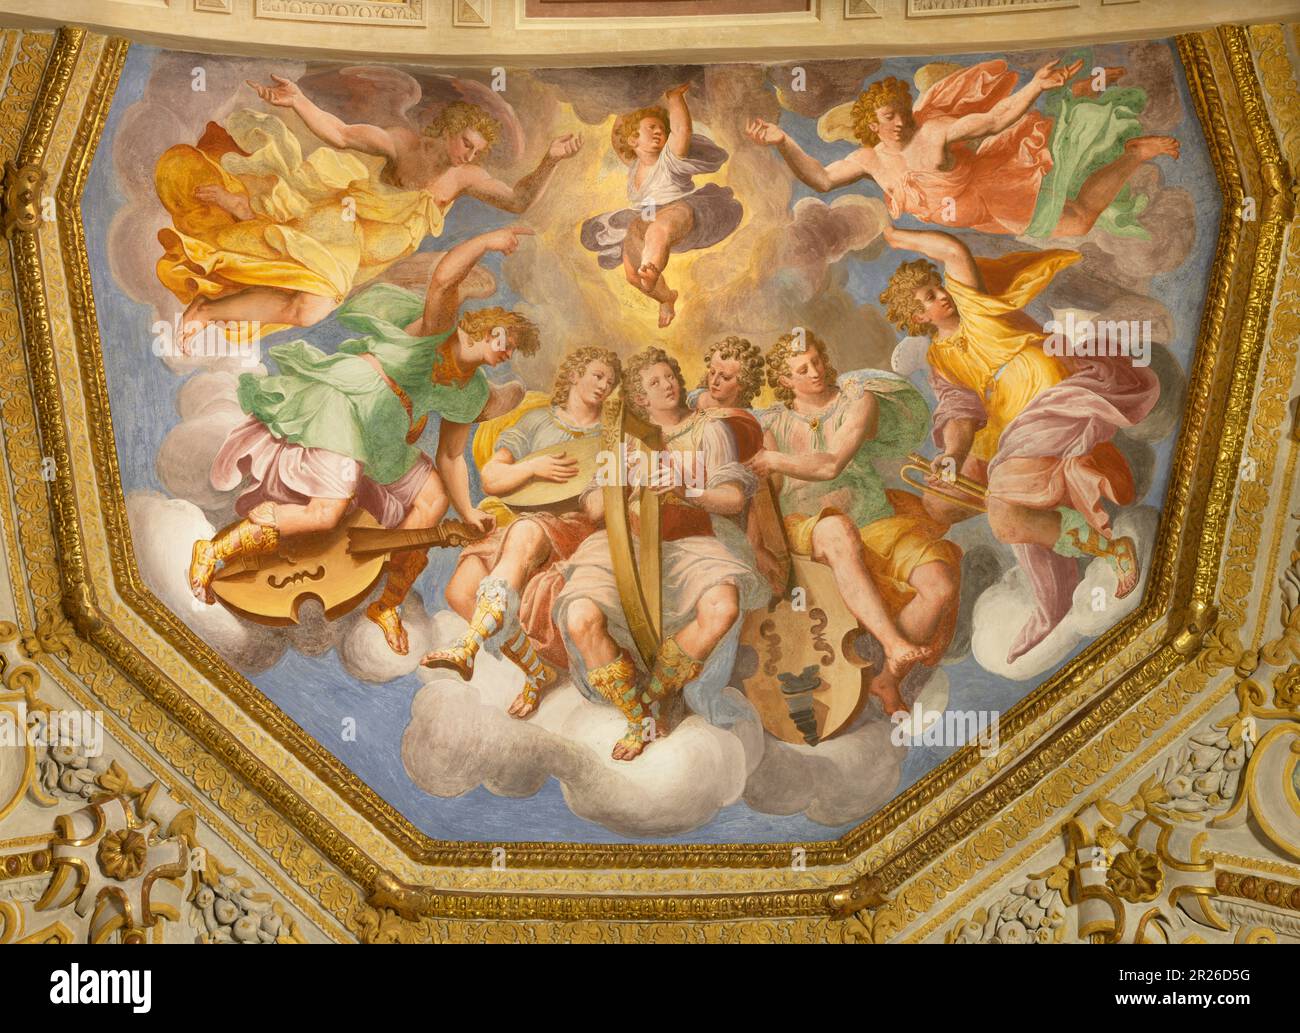 GENOVA, ITALY - MARCH 6, 2023: The ceiling fresco of Choir of angels with the music instruments in the church Chiesa di Santa Caterina Stock Photo